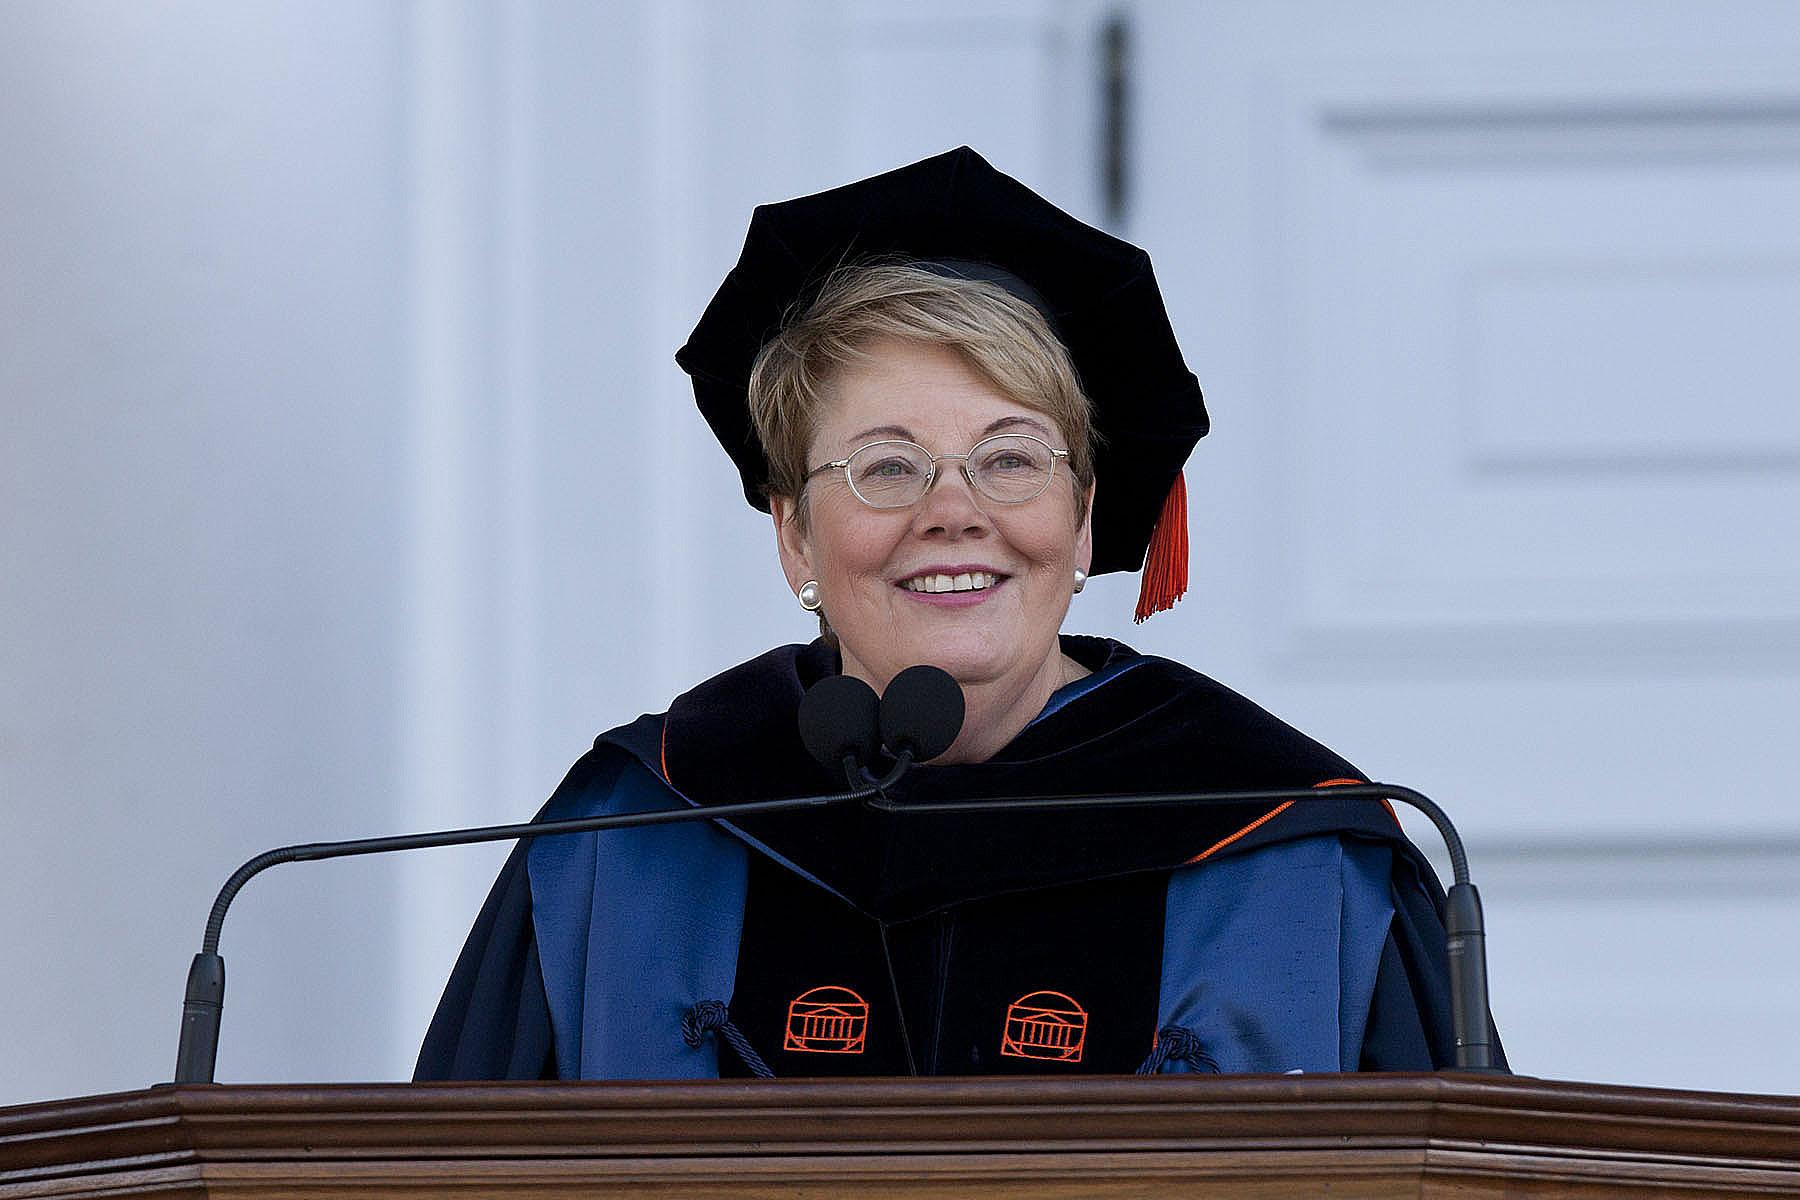 Teresa A. Sullivan dressed in graduation robe and hat speaking at a podium